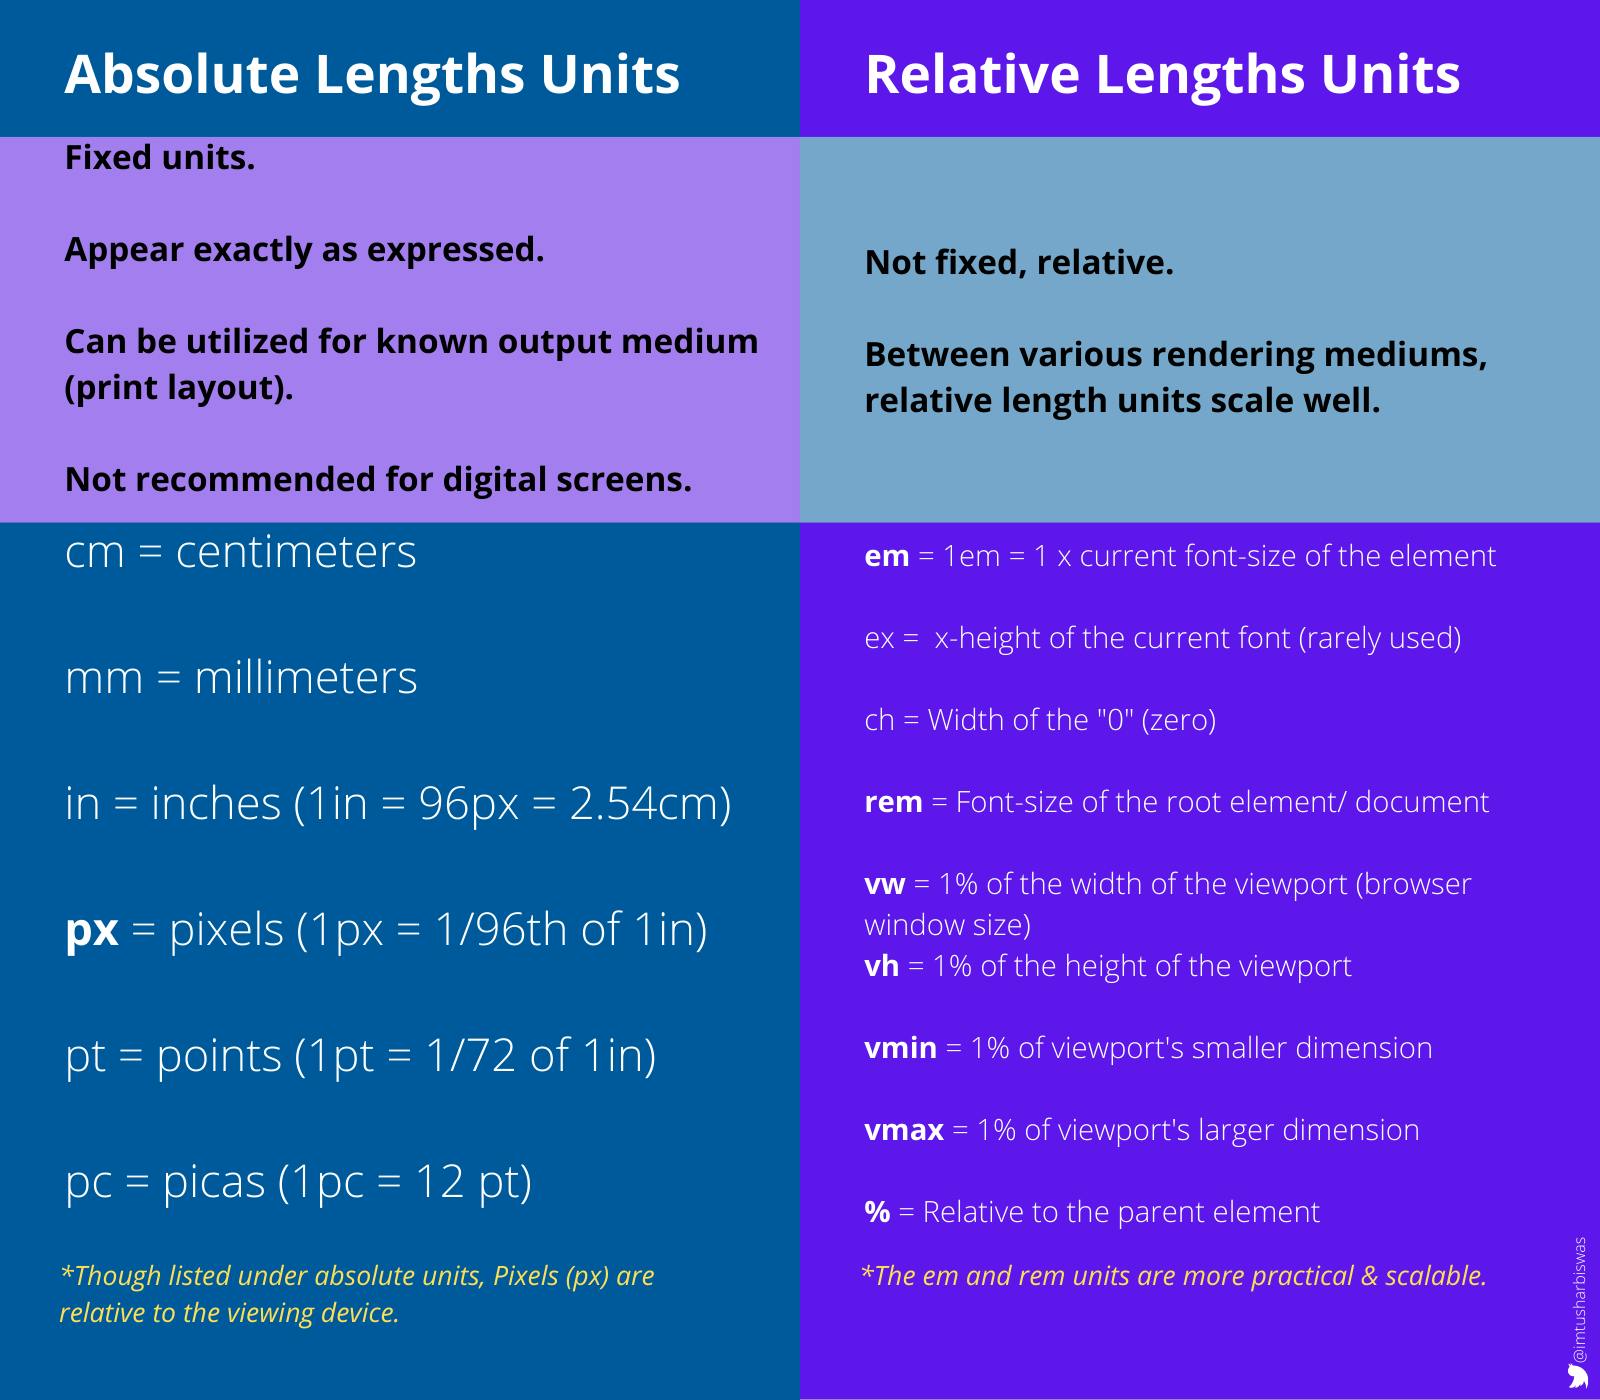 Absolute Vs Relative.png